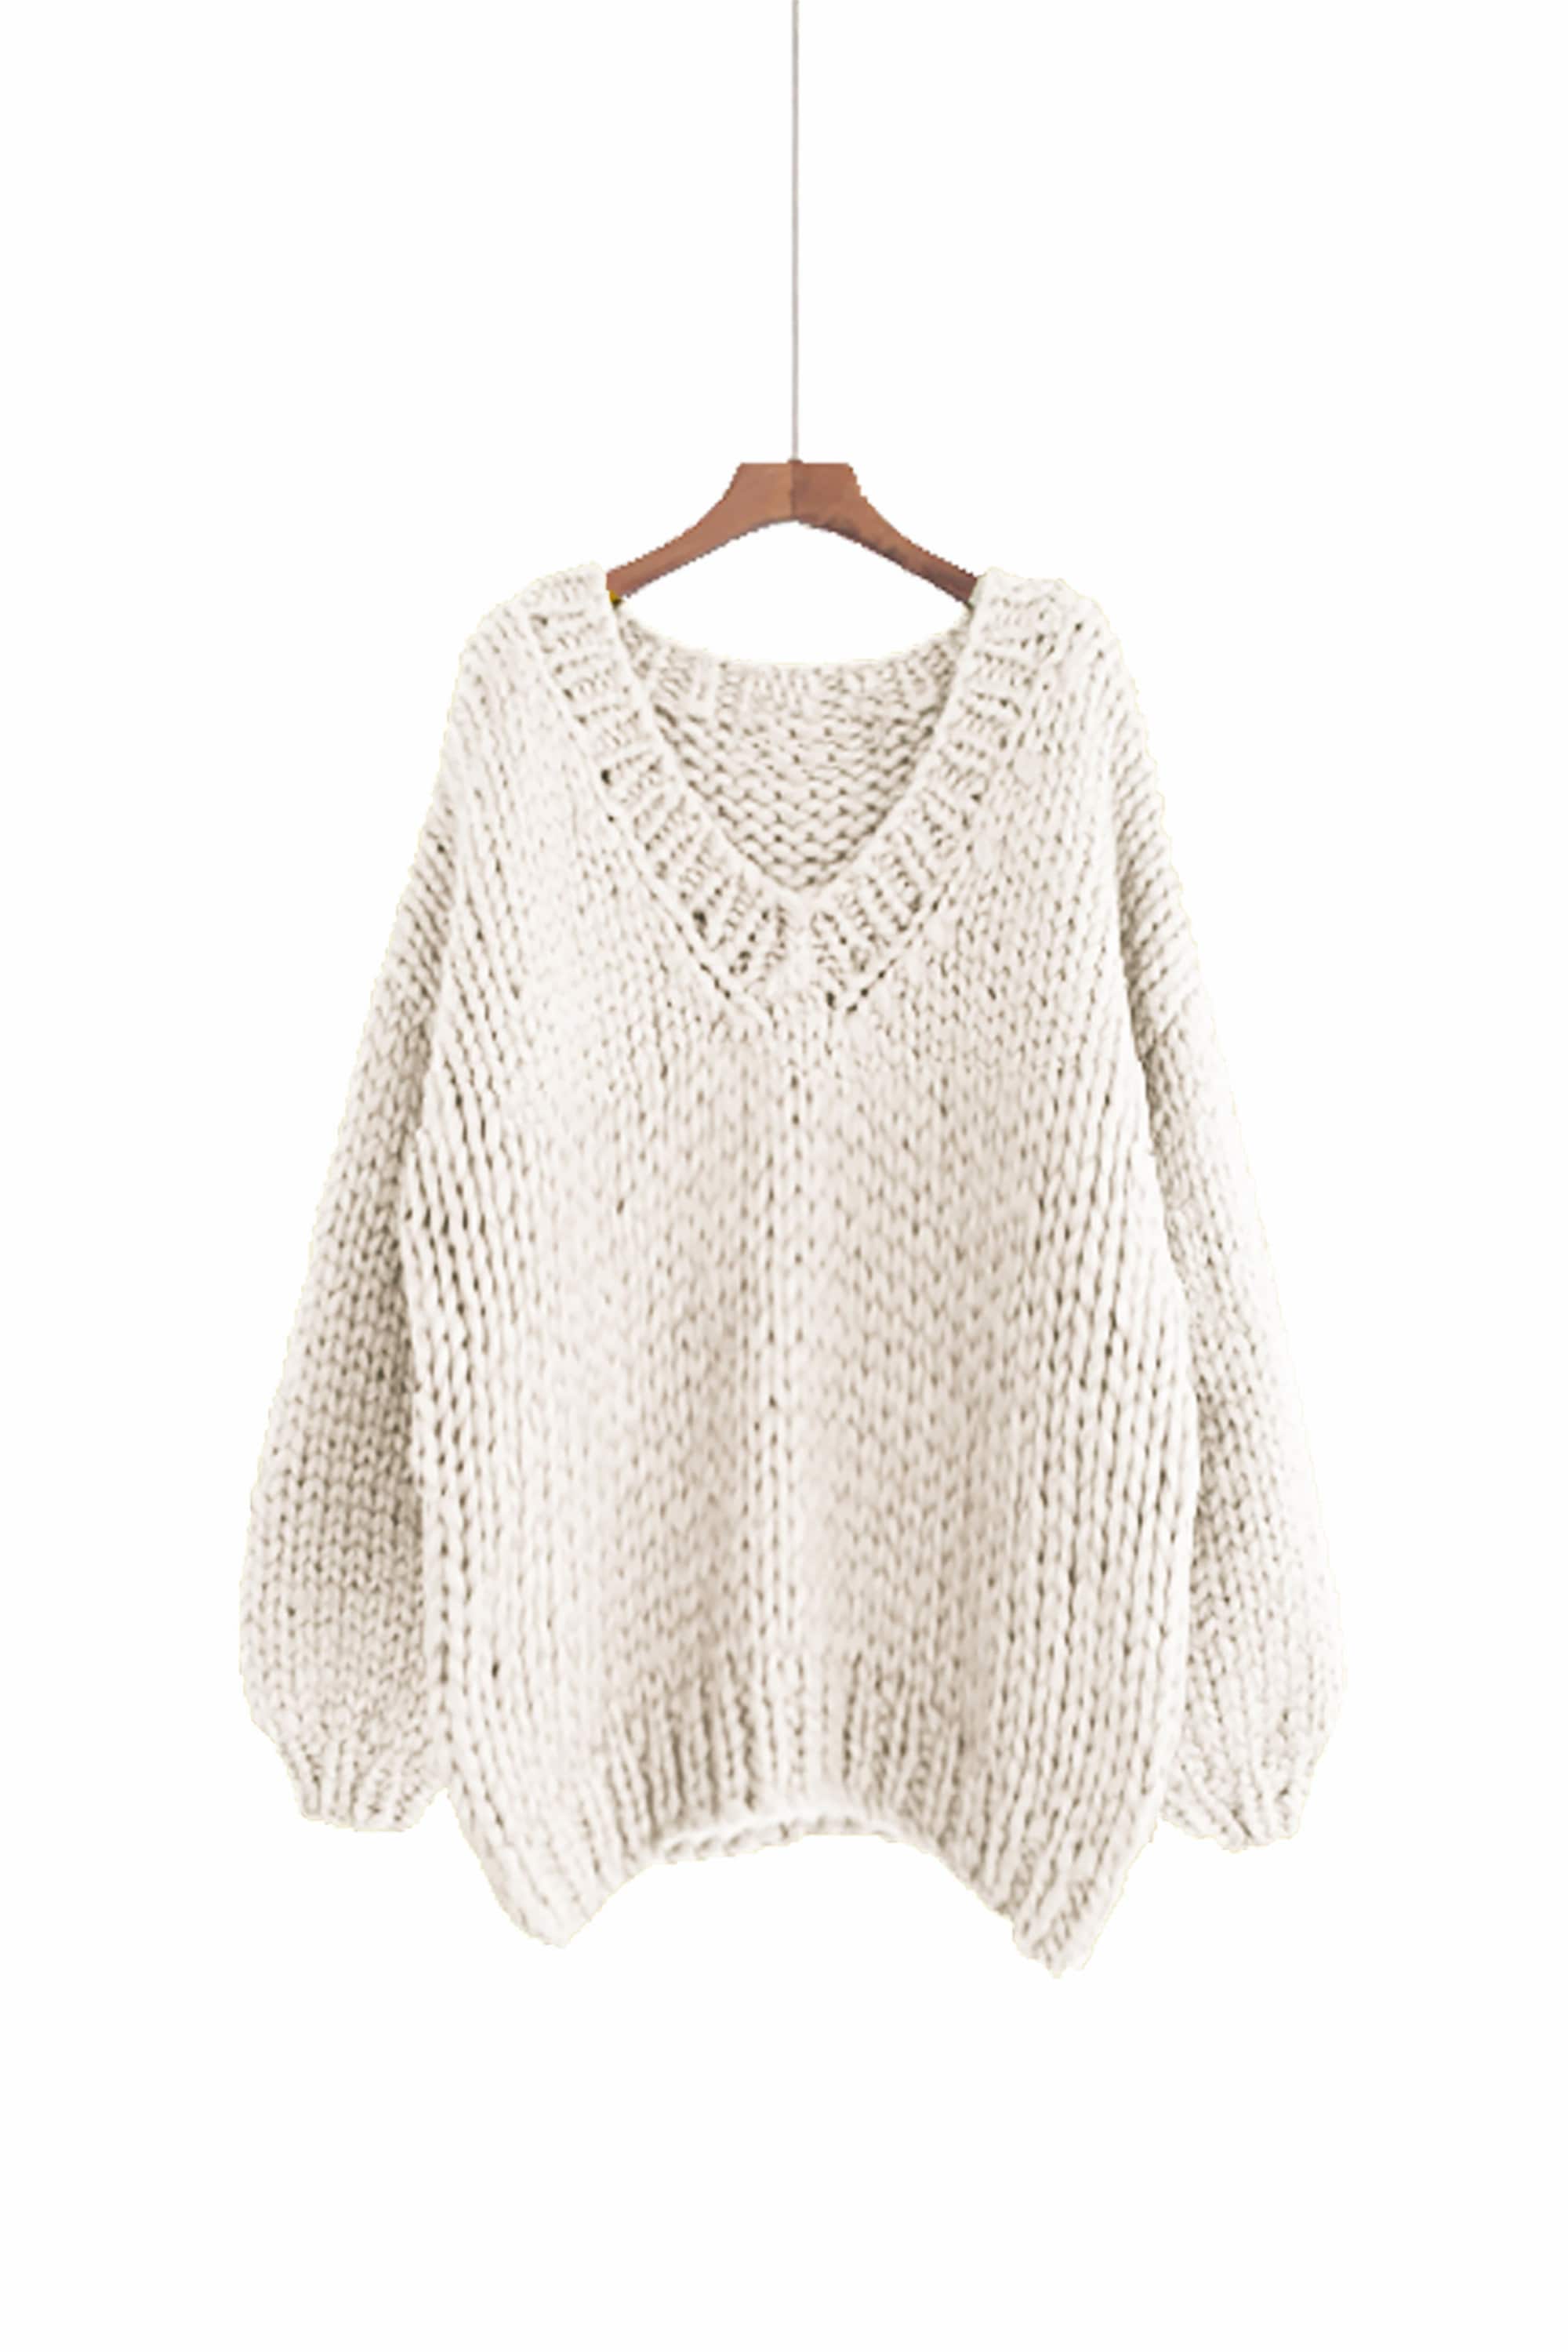 Hand Knit WOOL Sweater Oversize V-neck White Sweater - Woman Cream Sweater Slouchy Etsy